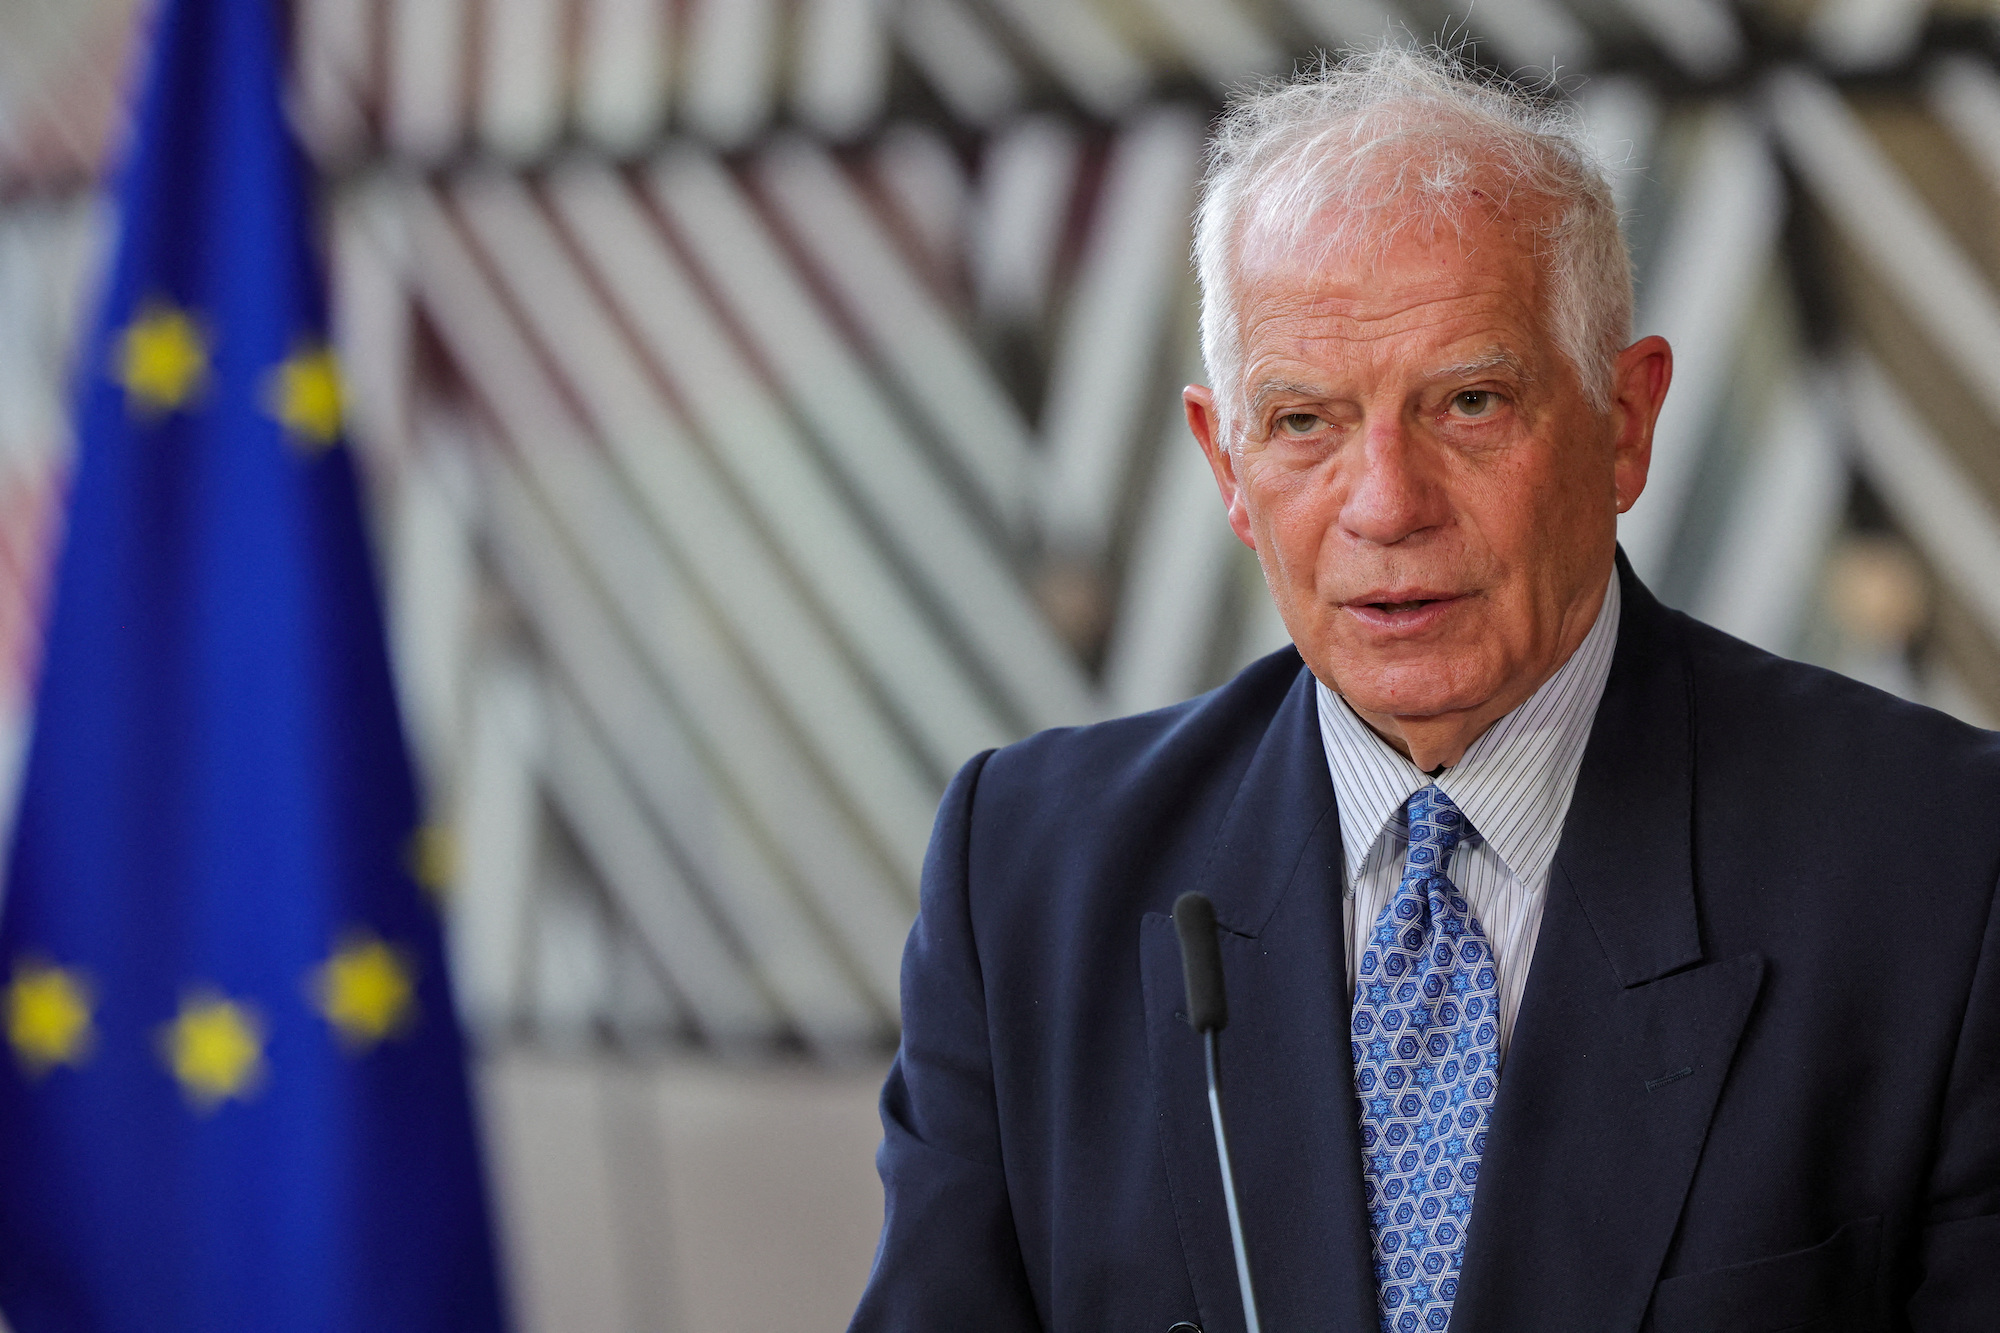 European Union foreign policy chief Josep Borrell speaks to members of the media ahead of a EU-US Energy Council Ministerial Meeting in Brussels, Belgium, on April 4, 2023.